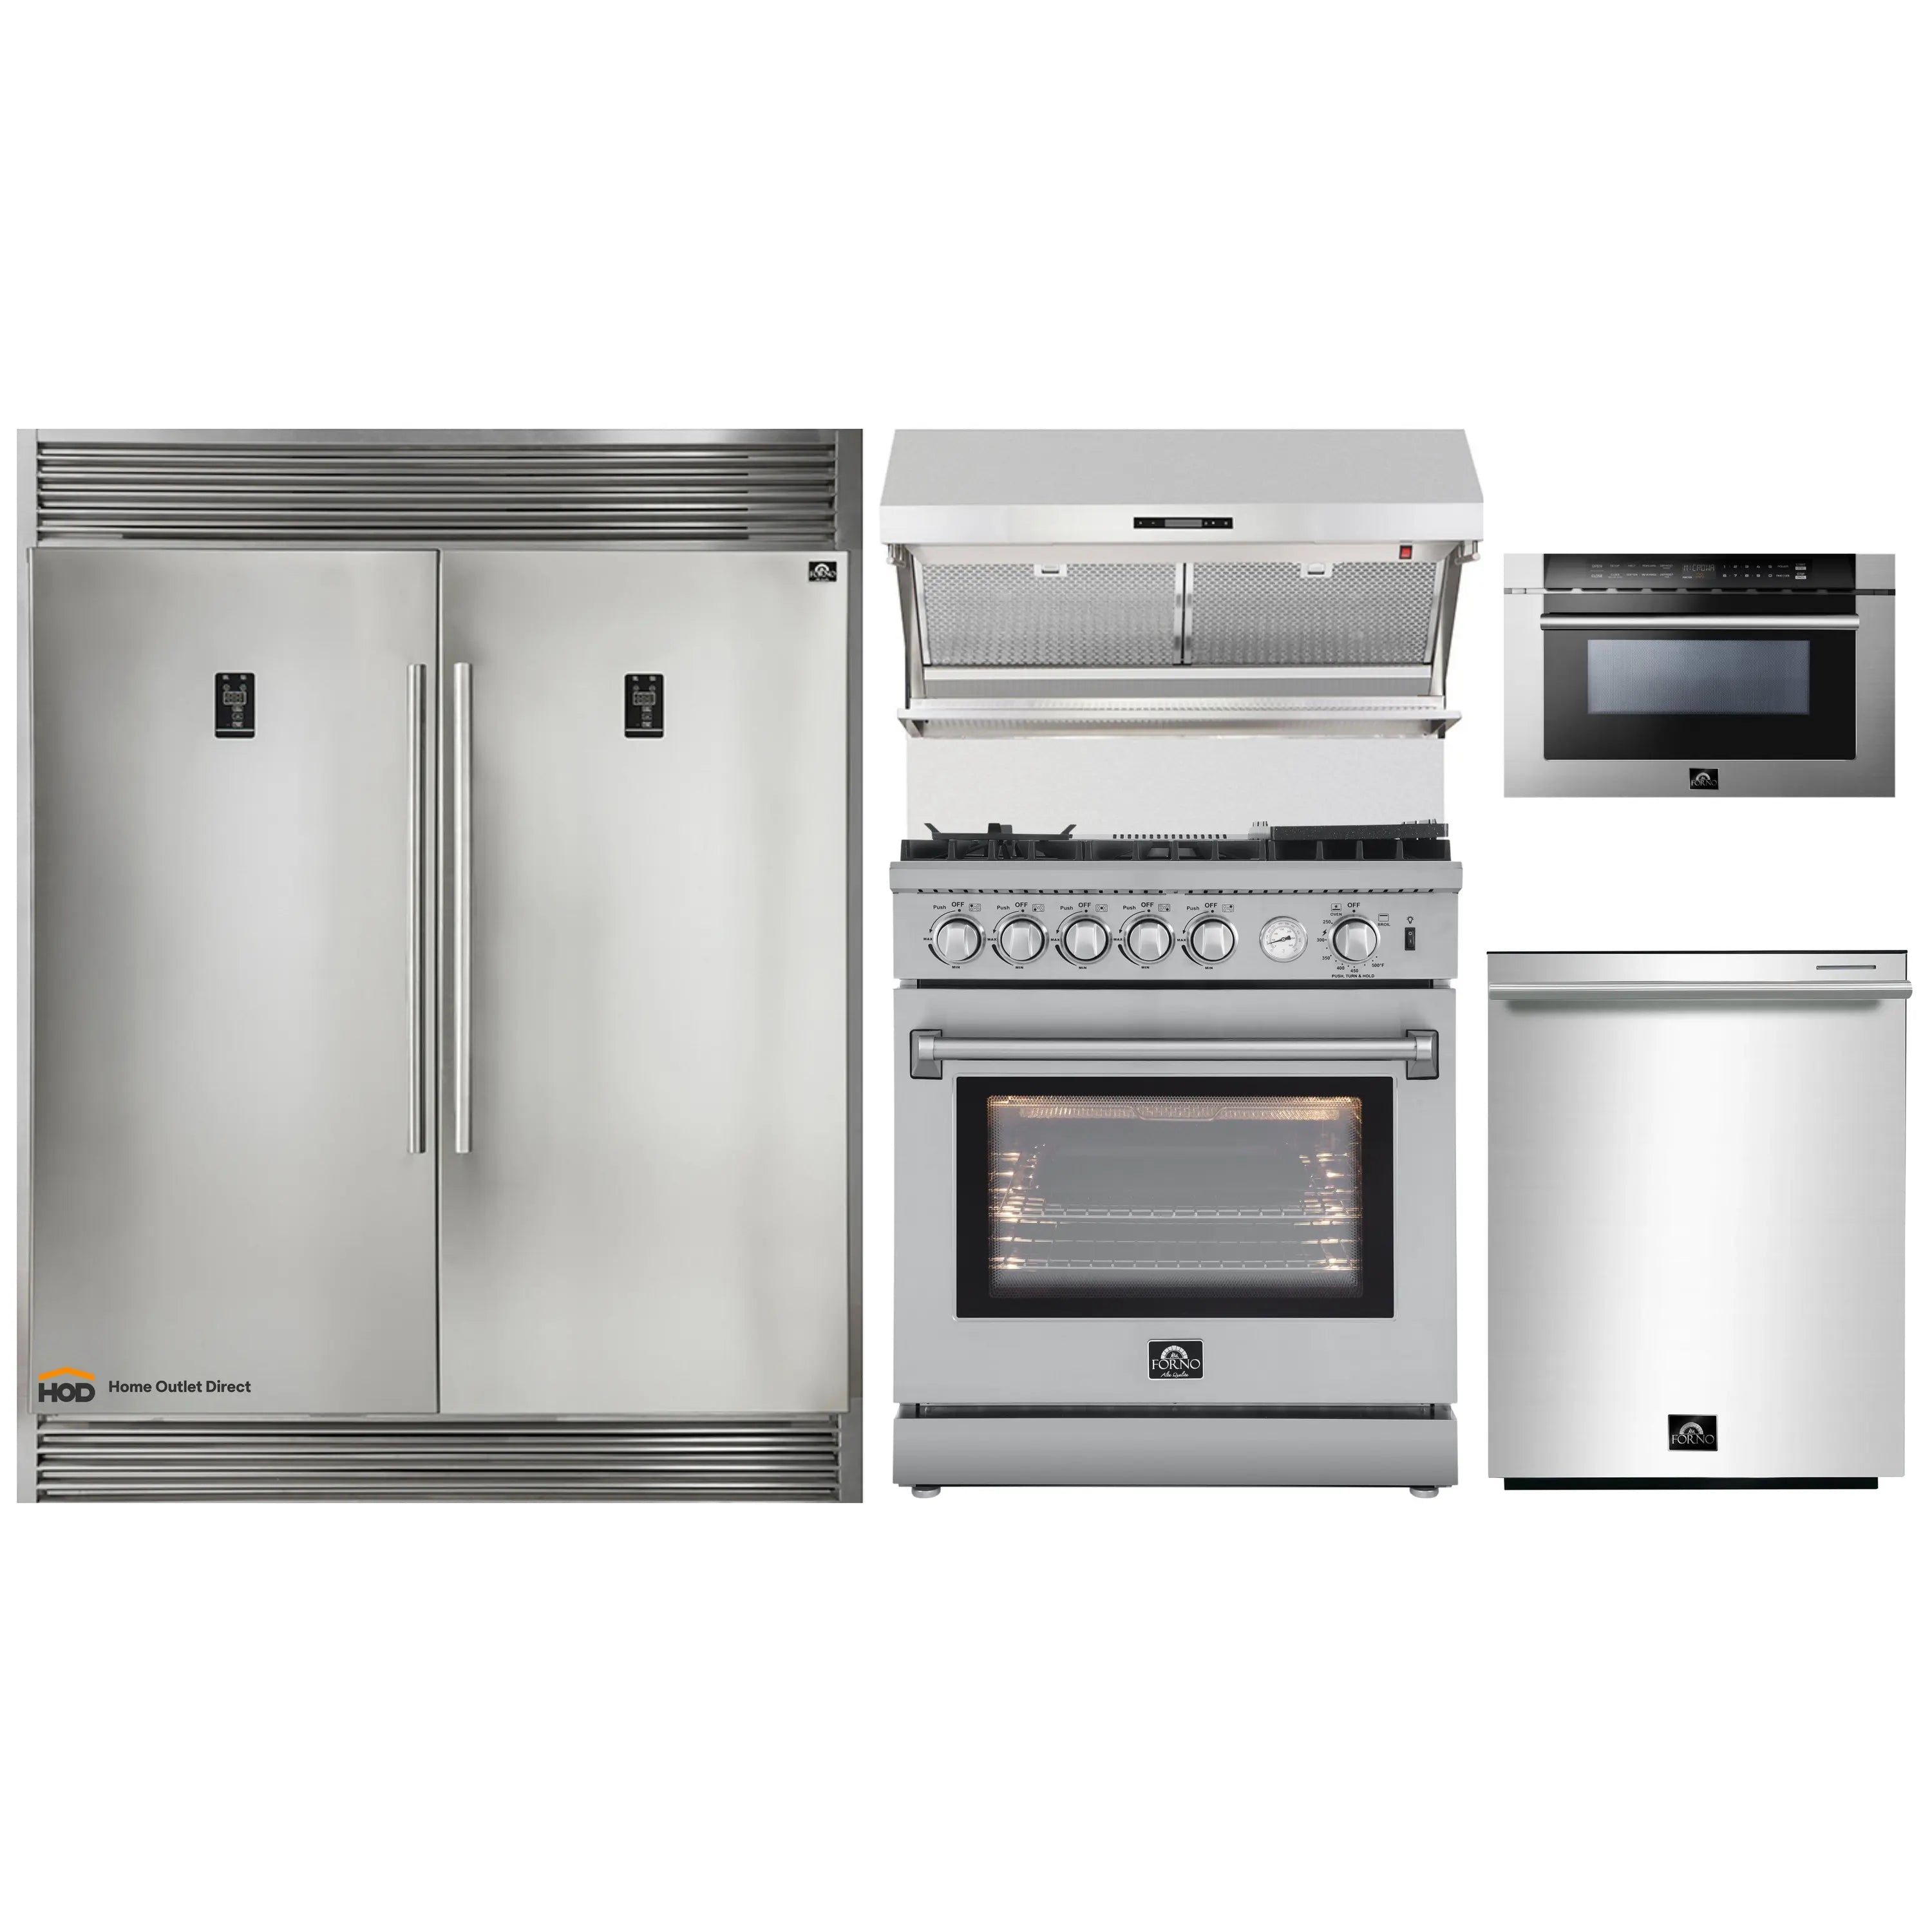 Forno 5-Piece Appliance Package - 30-Inch Gas Range with Air Fryer, 56-Inch Pro-Style Refrigerator, Wall Mount Hood with Backsplash, Microwave Drawer, & 3-Rack Dishwasher in Stainless Steel